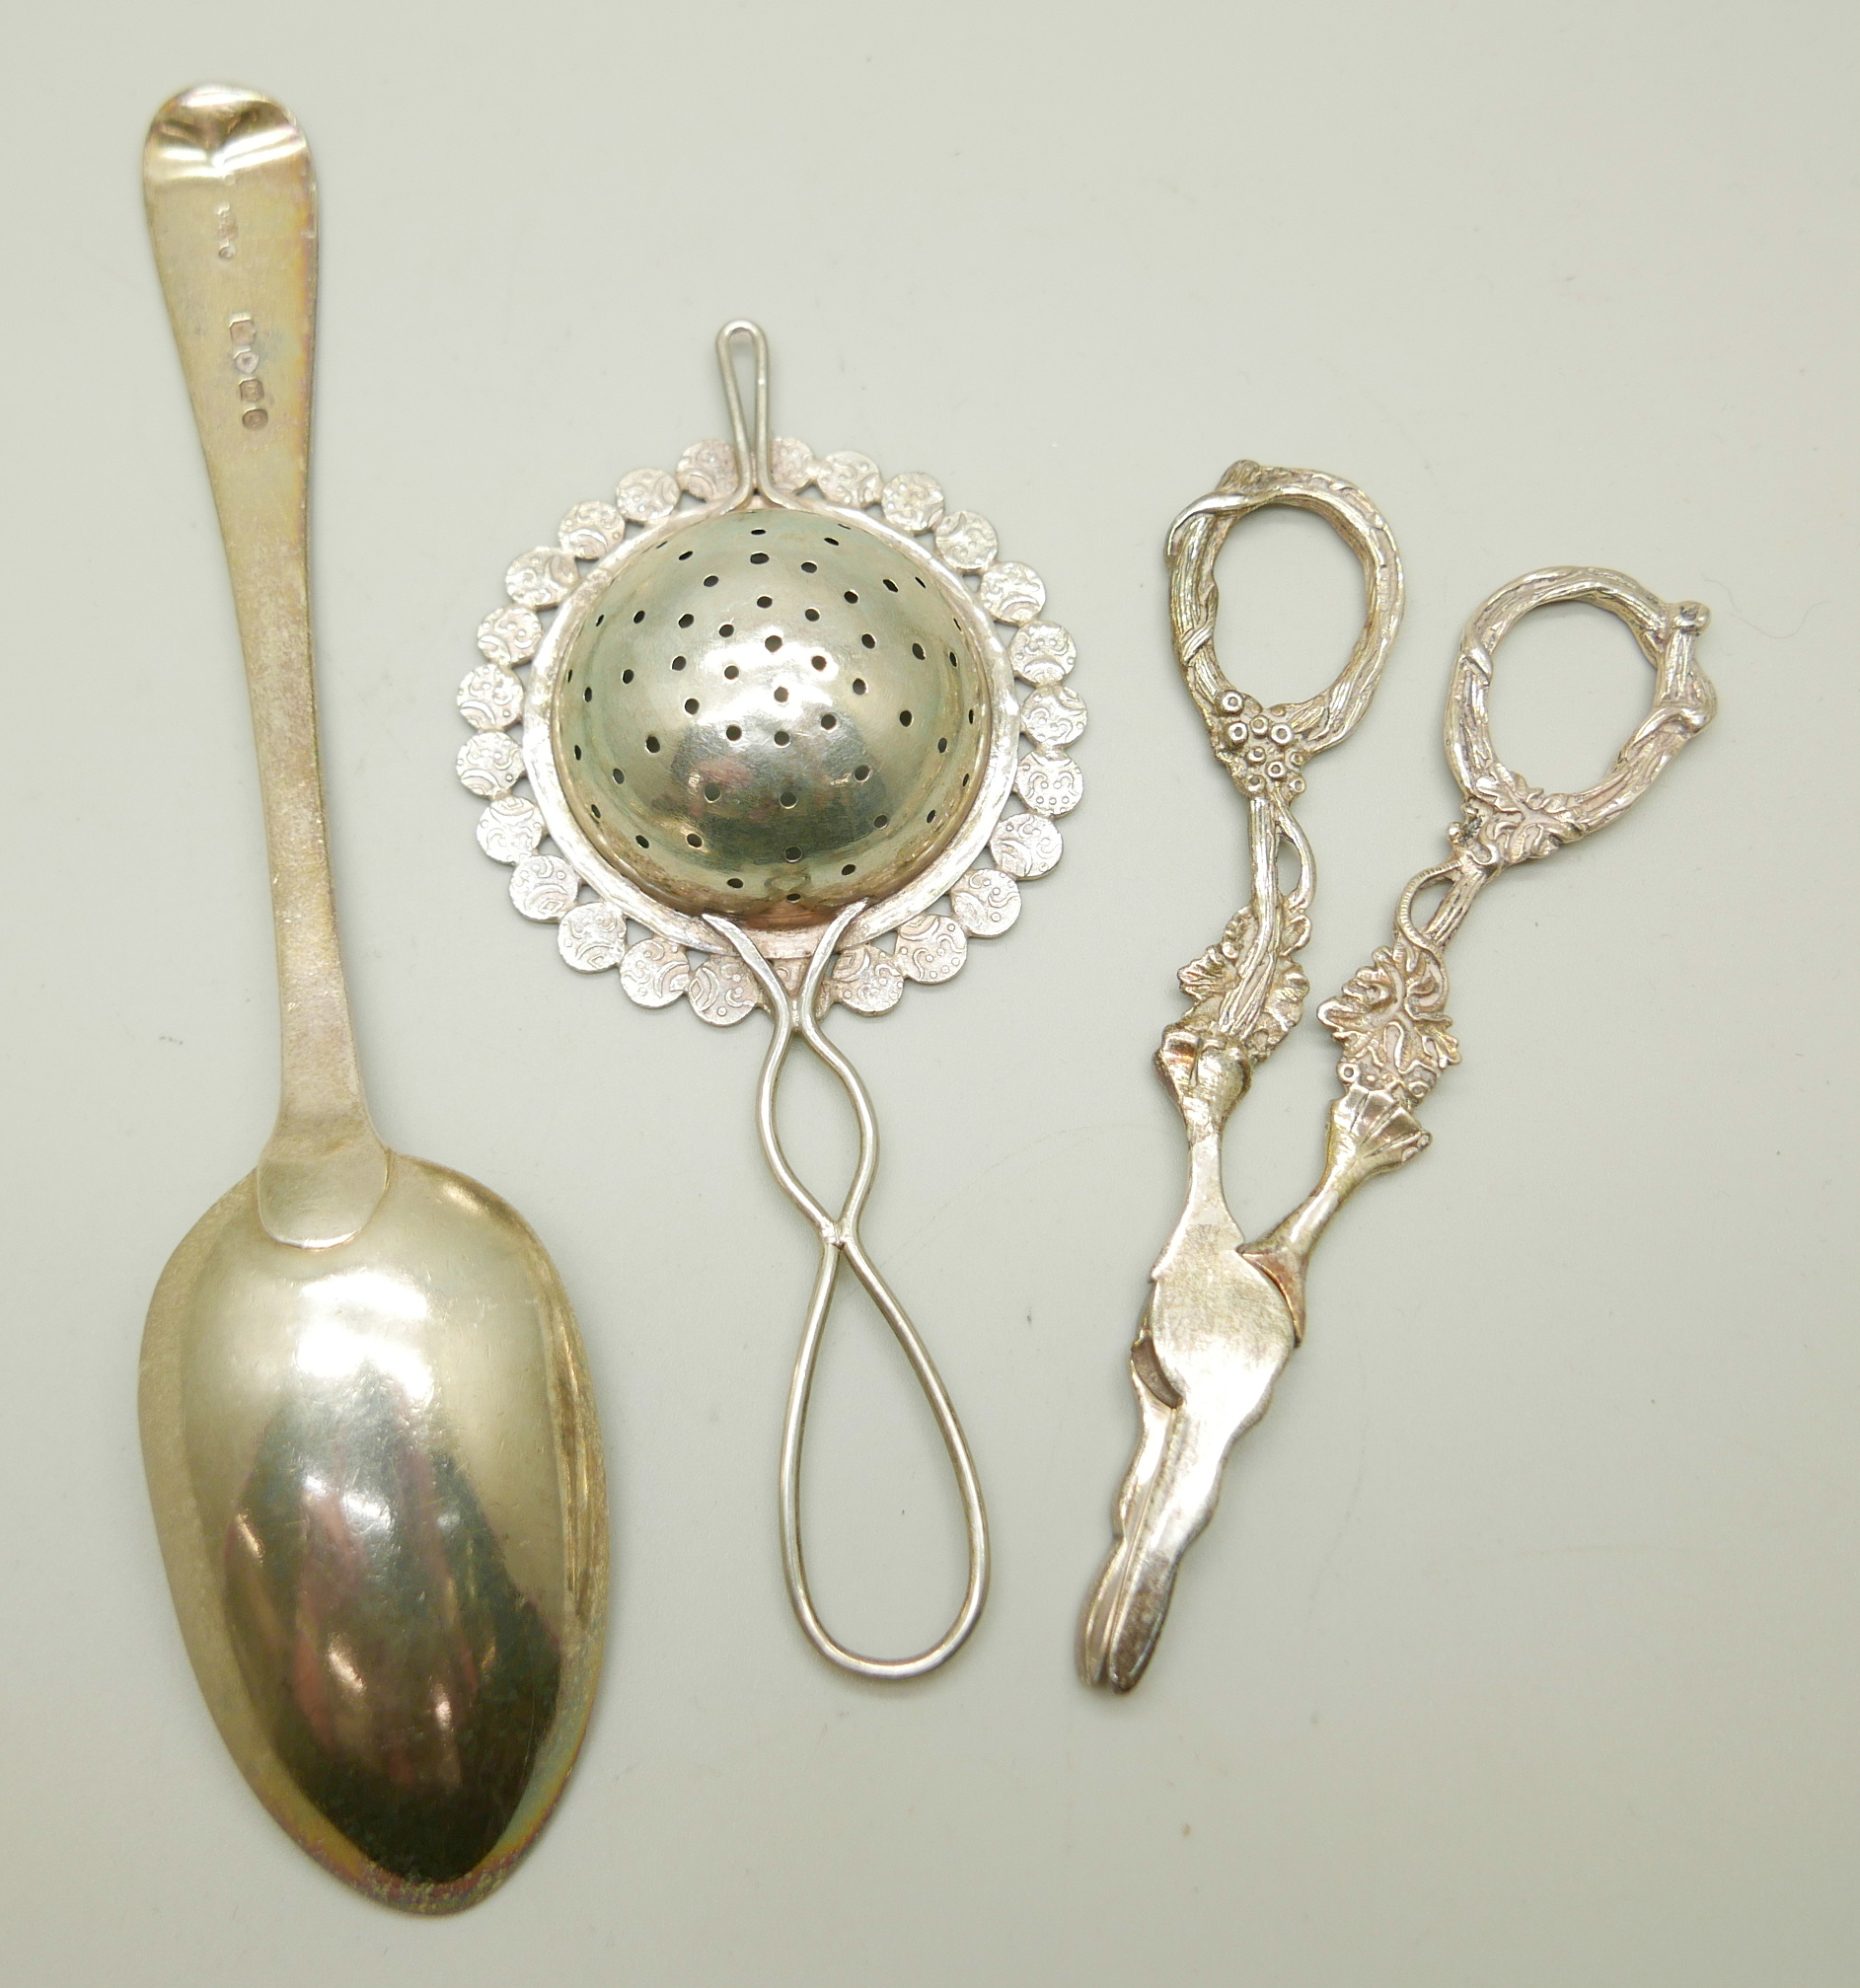 A Victorian silver spoon by George Adams, a strainer and a pair of silver grape scissors, (spoon and - Image 3 of 6